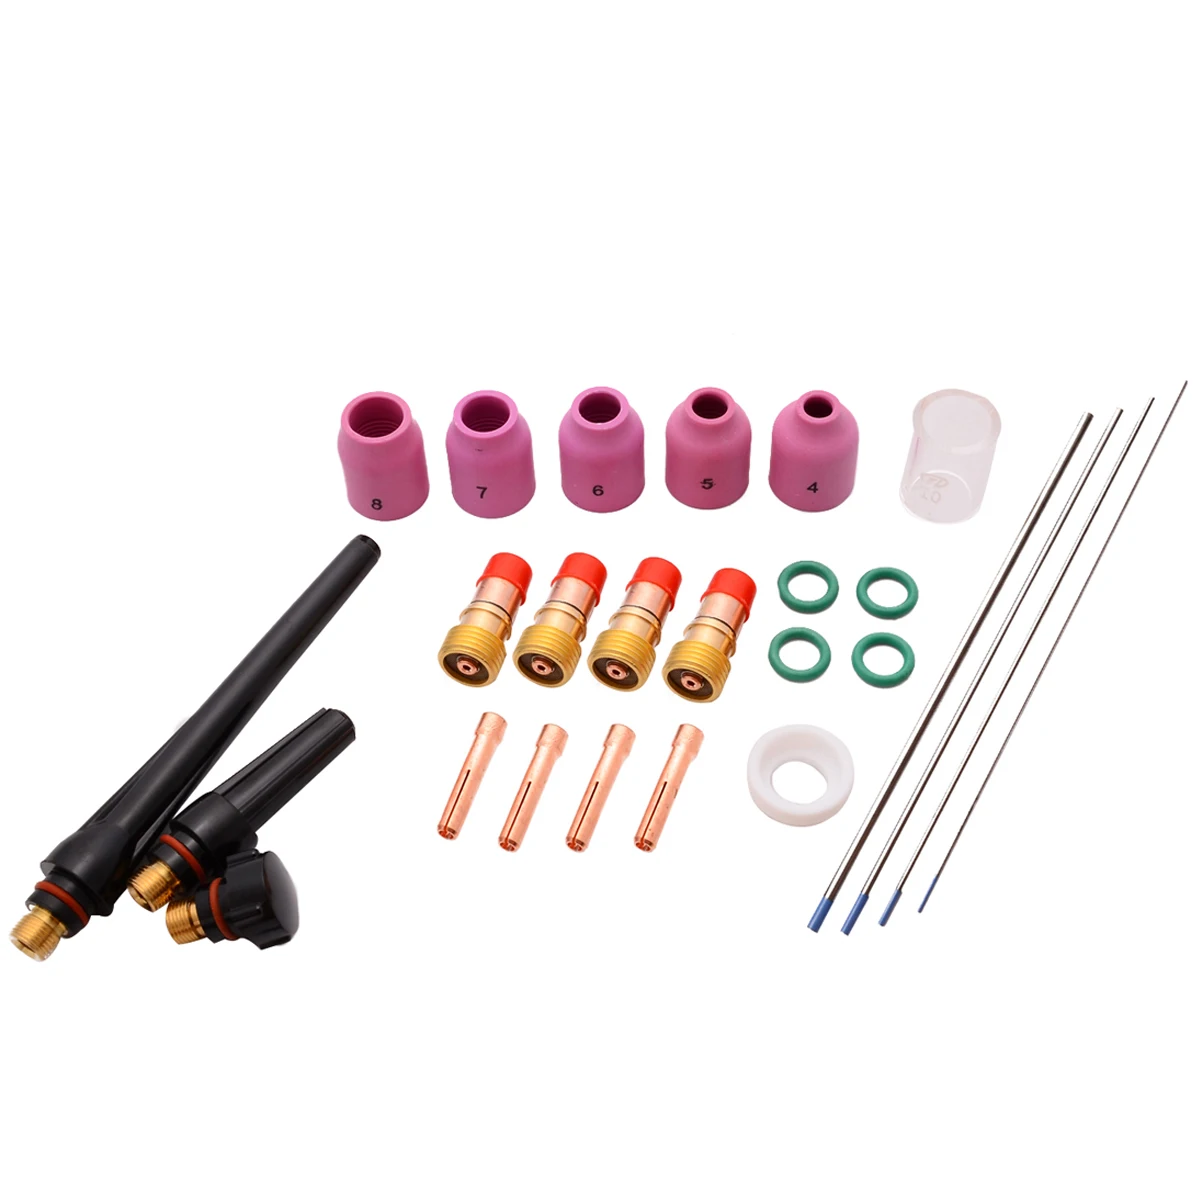 

26pcs/Set Tig Welding Torch Nozzle Cup Tungsten Gas Lens WL20 Kit Welding Accessories For TIG WP-17/18/26